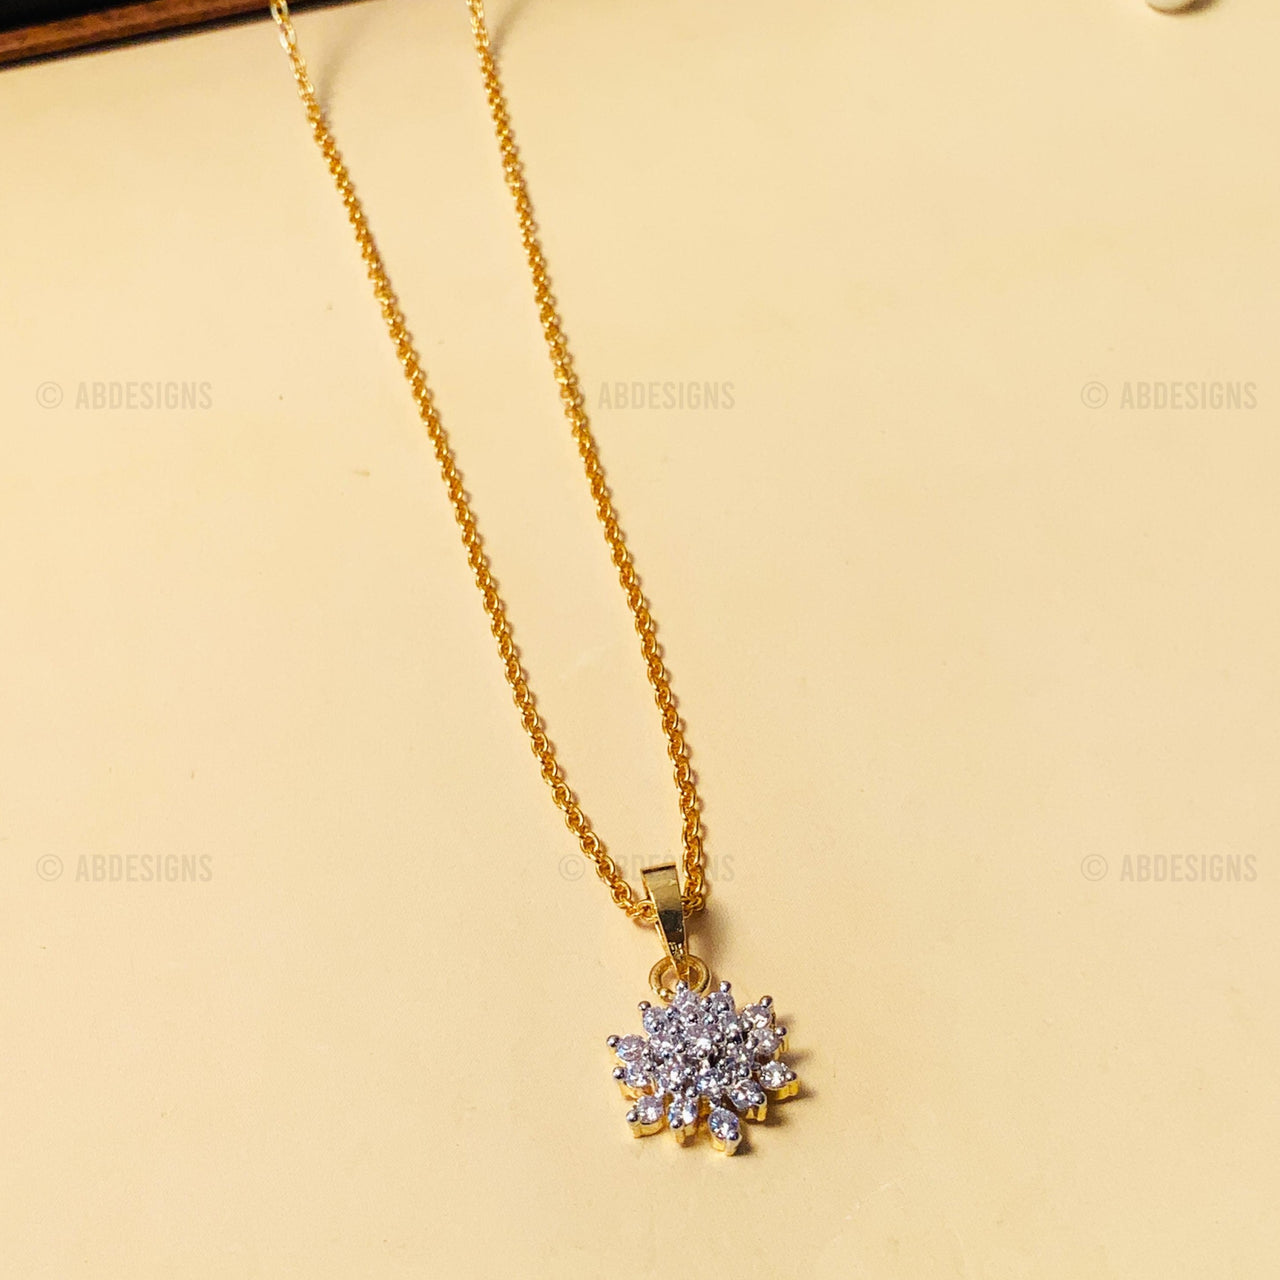 Precious High-Quality Gold Plated Pendant Chain